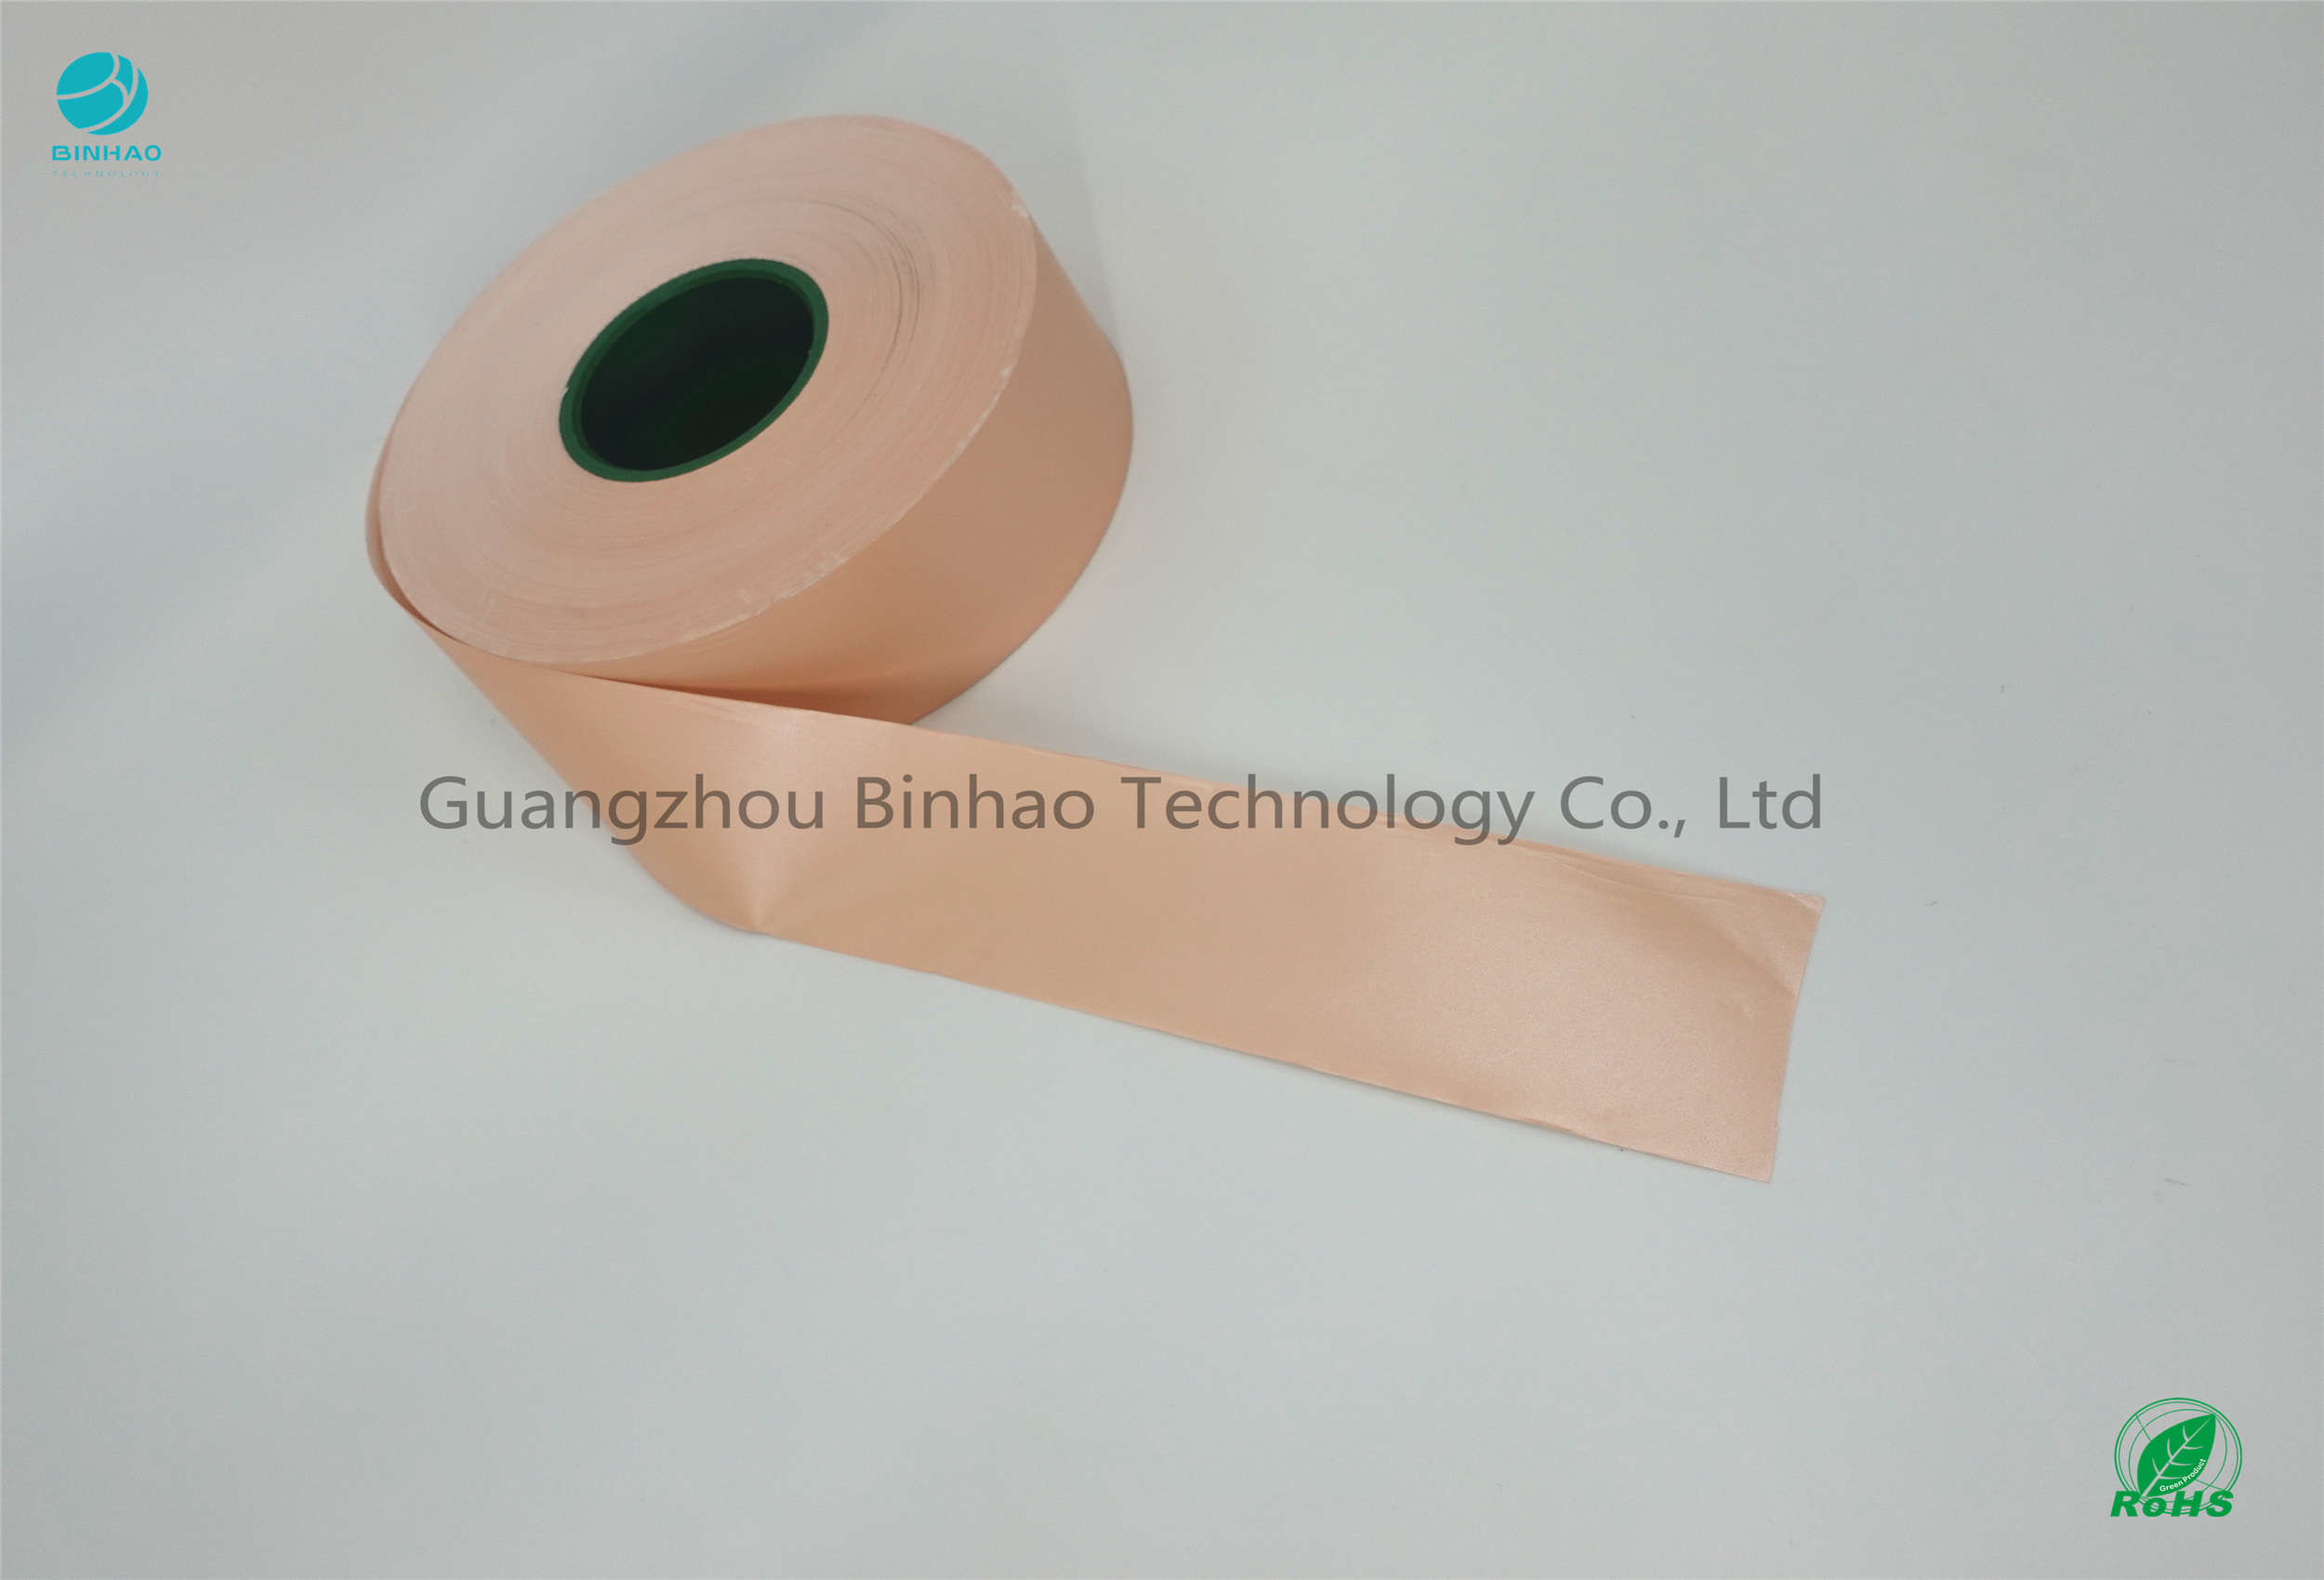 Tipping Paper For Rod Rolling Tobacco Filter paper inner dia 66mm